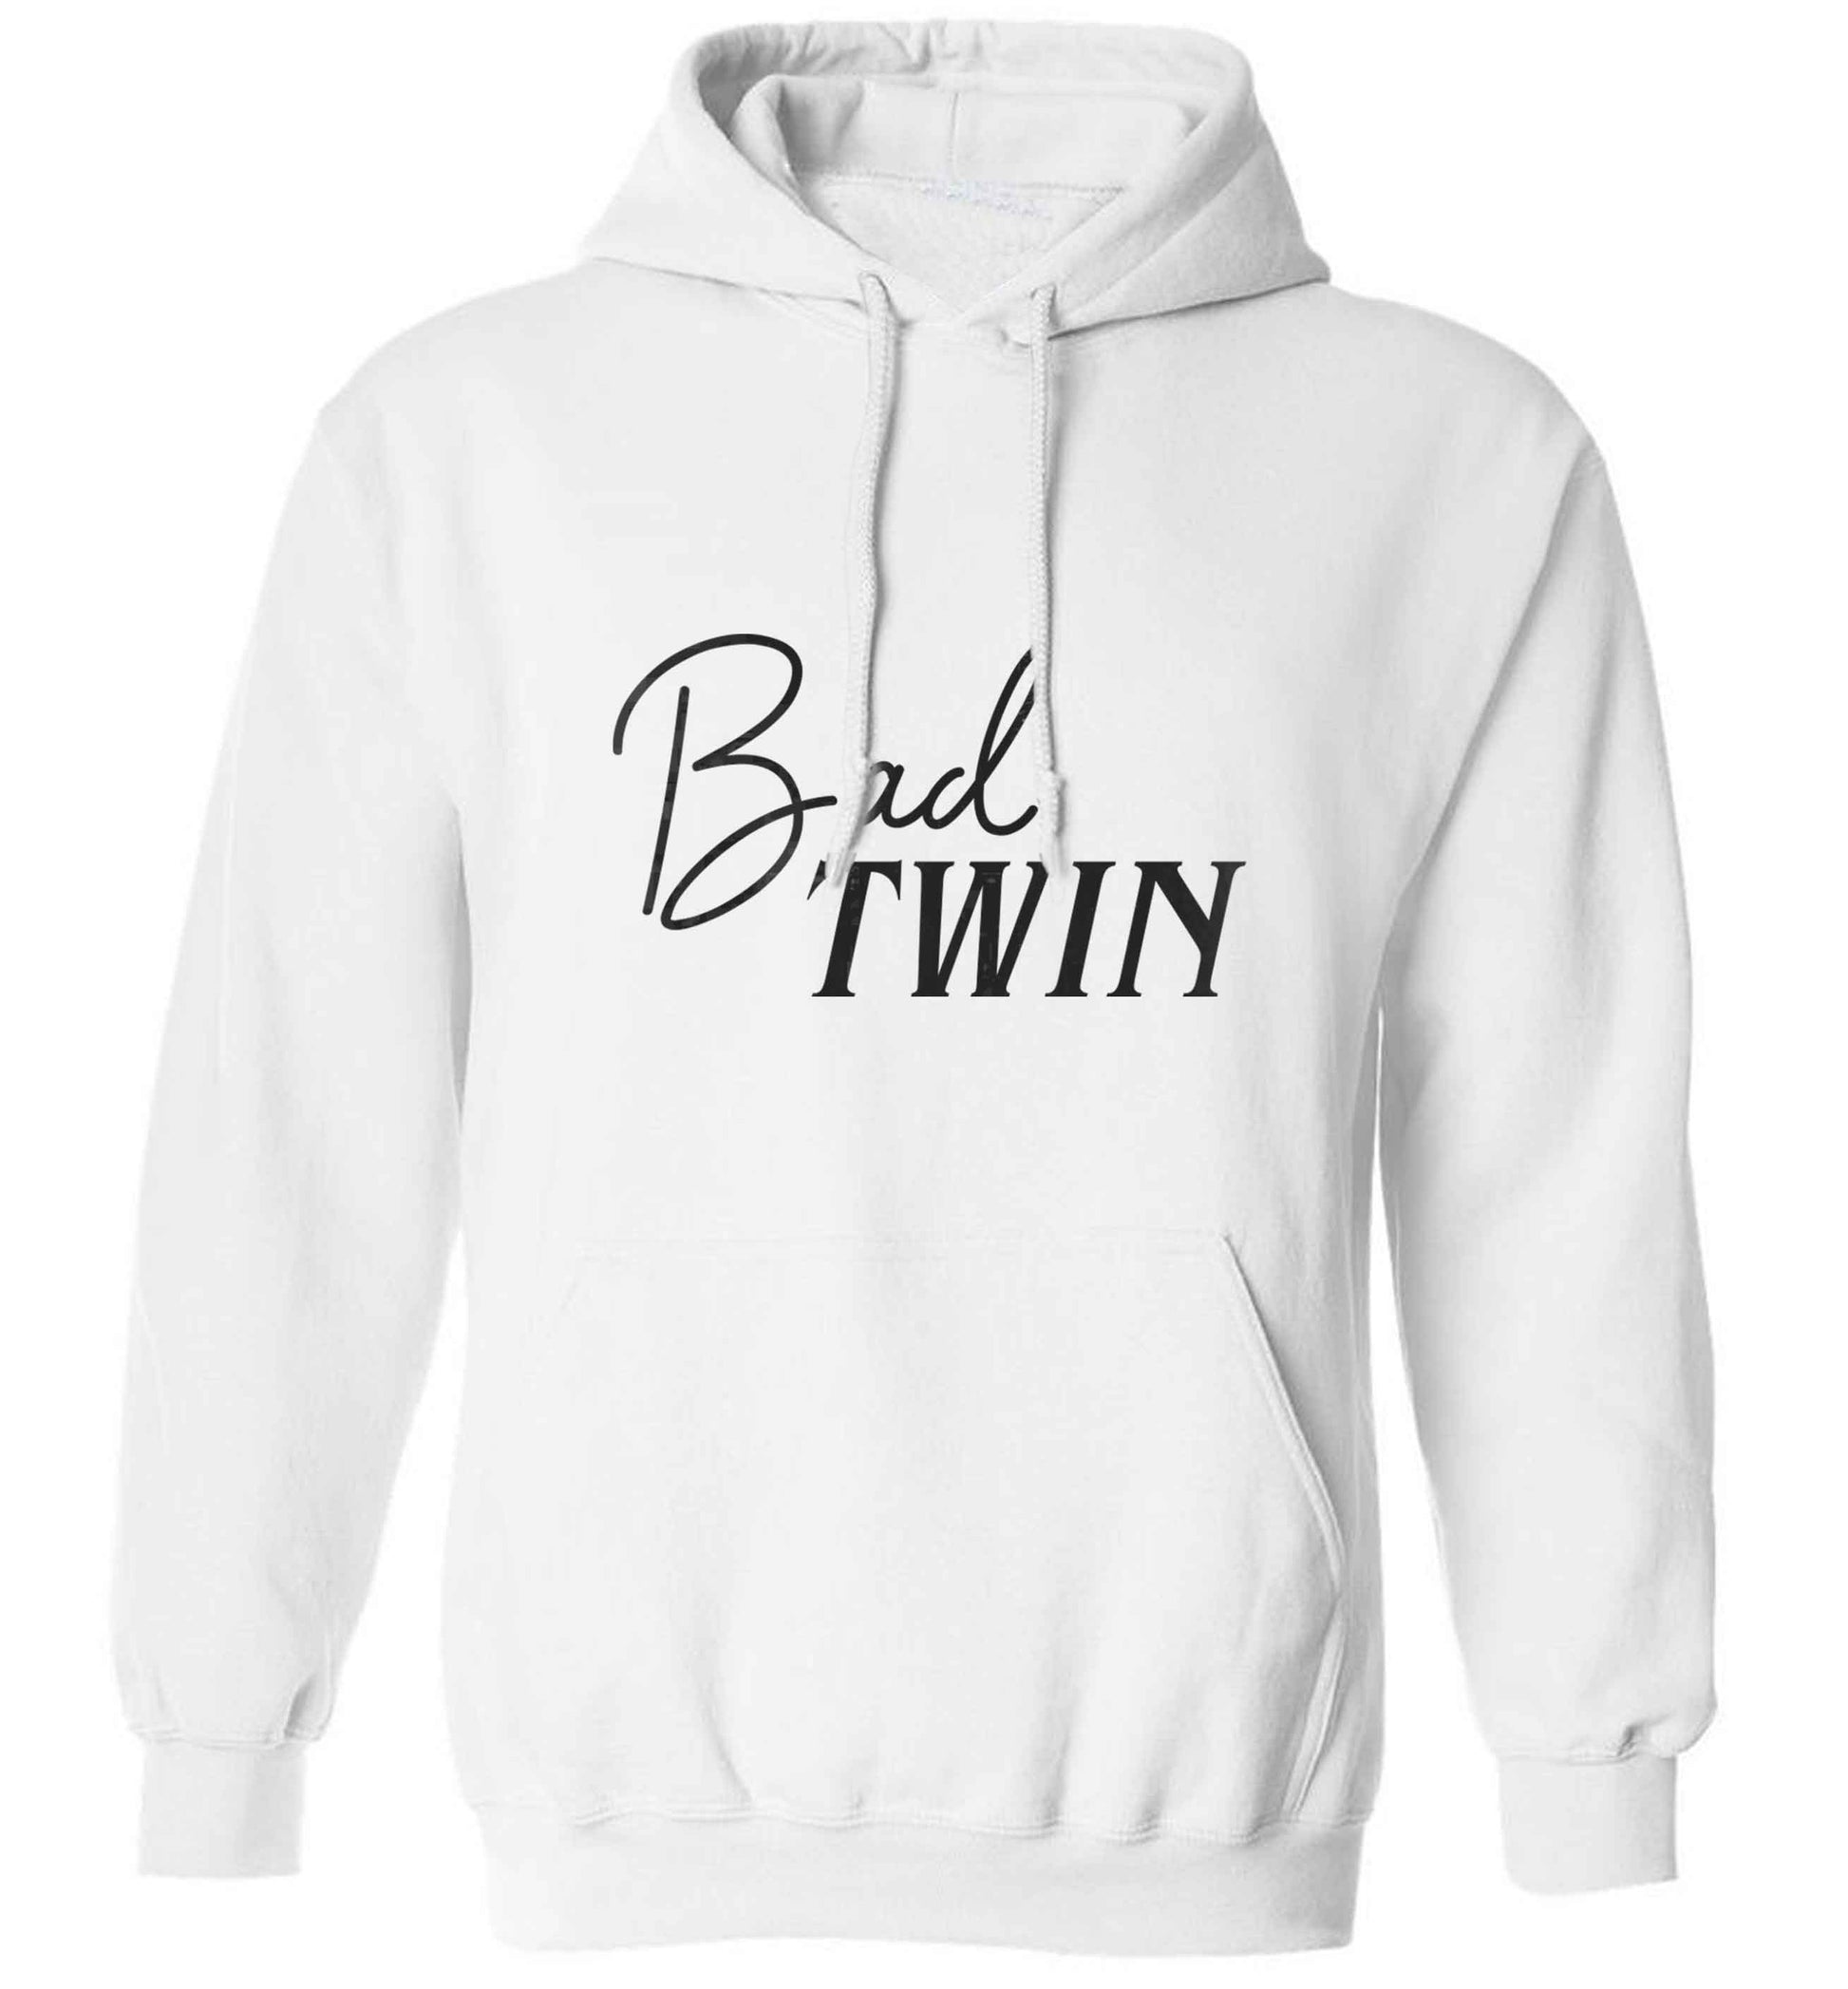 Bad twin adults unisex white hoodie 2XL